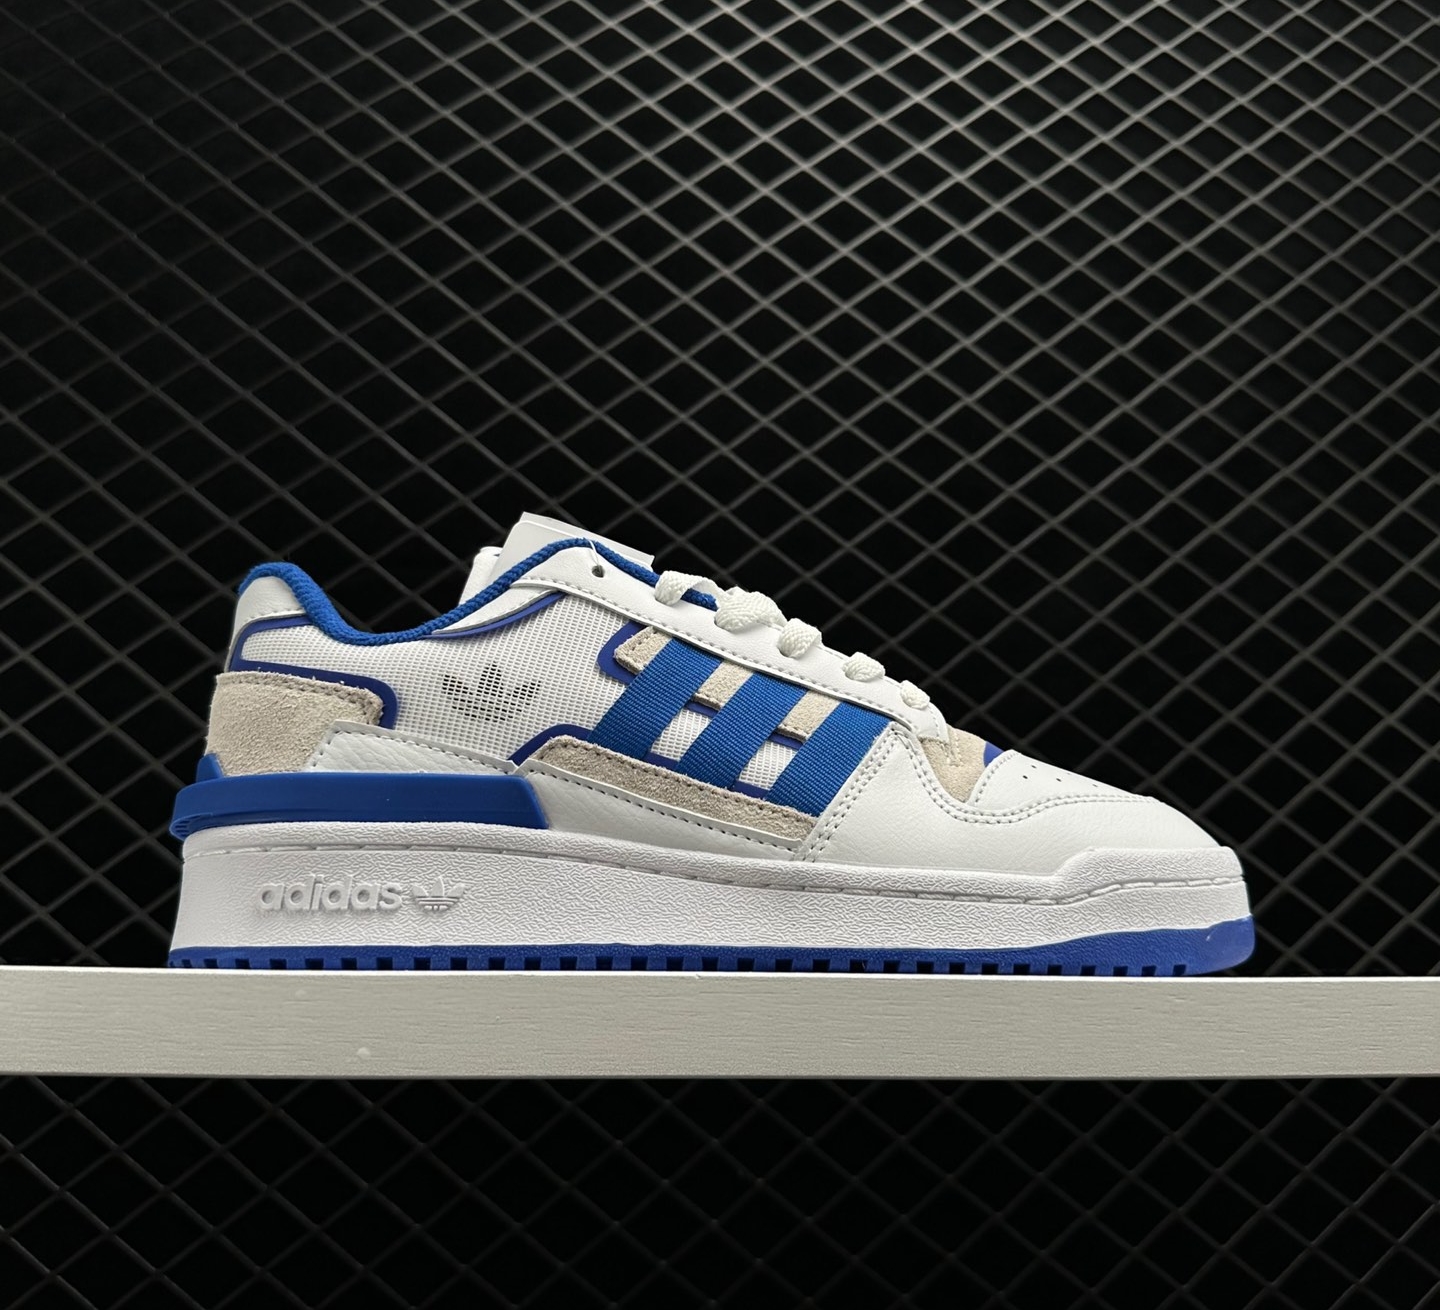 Adidas Originals Forum Exhibit Low 2 Blue White - Classic Style and Refreshing Color in One!